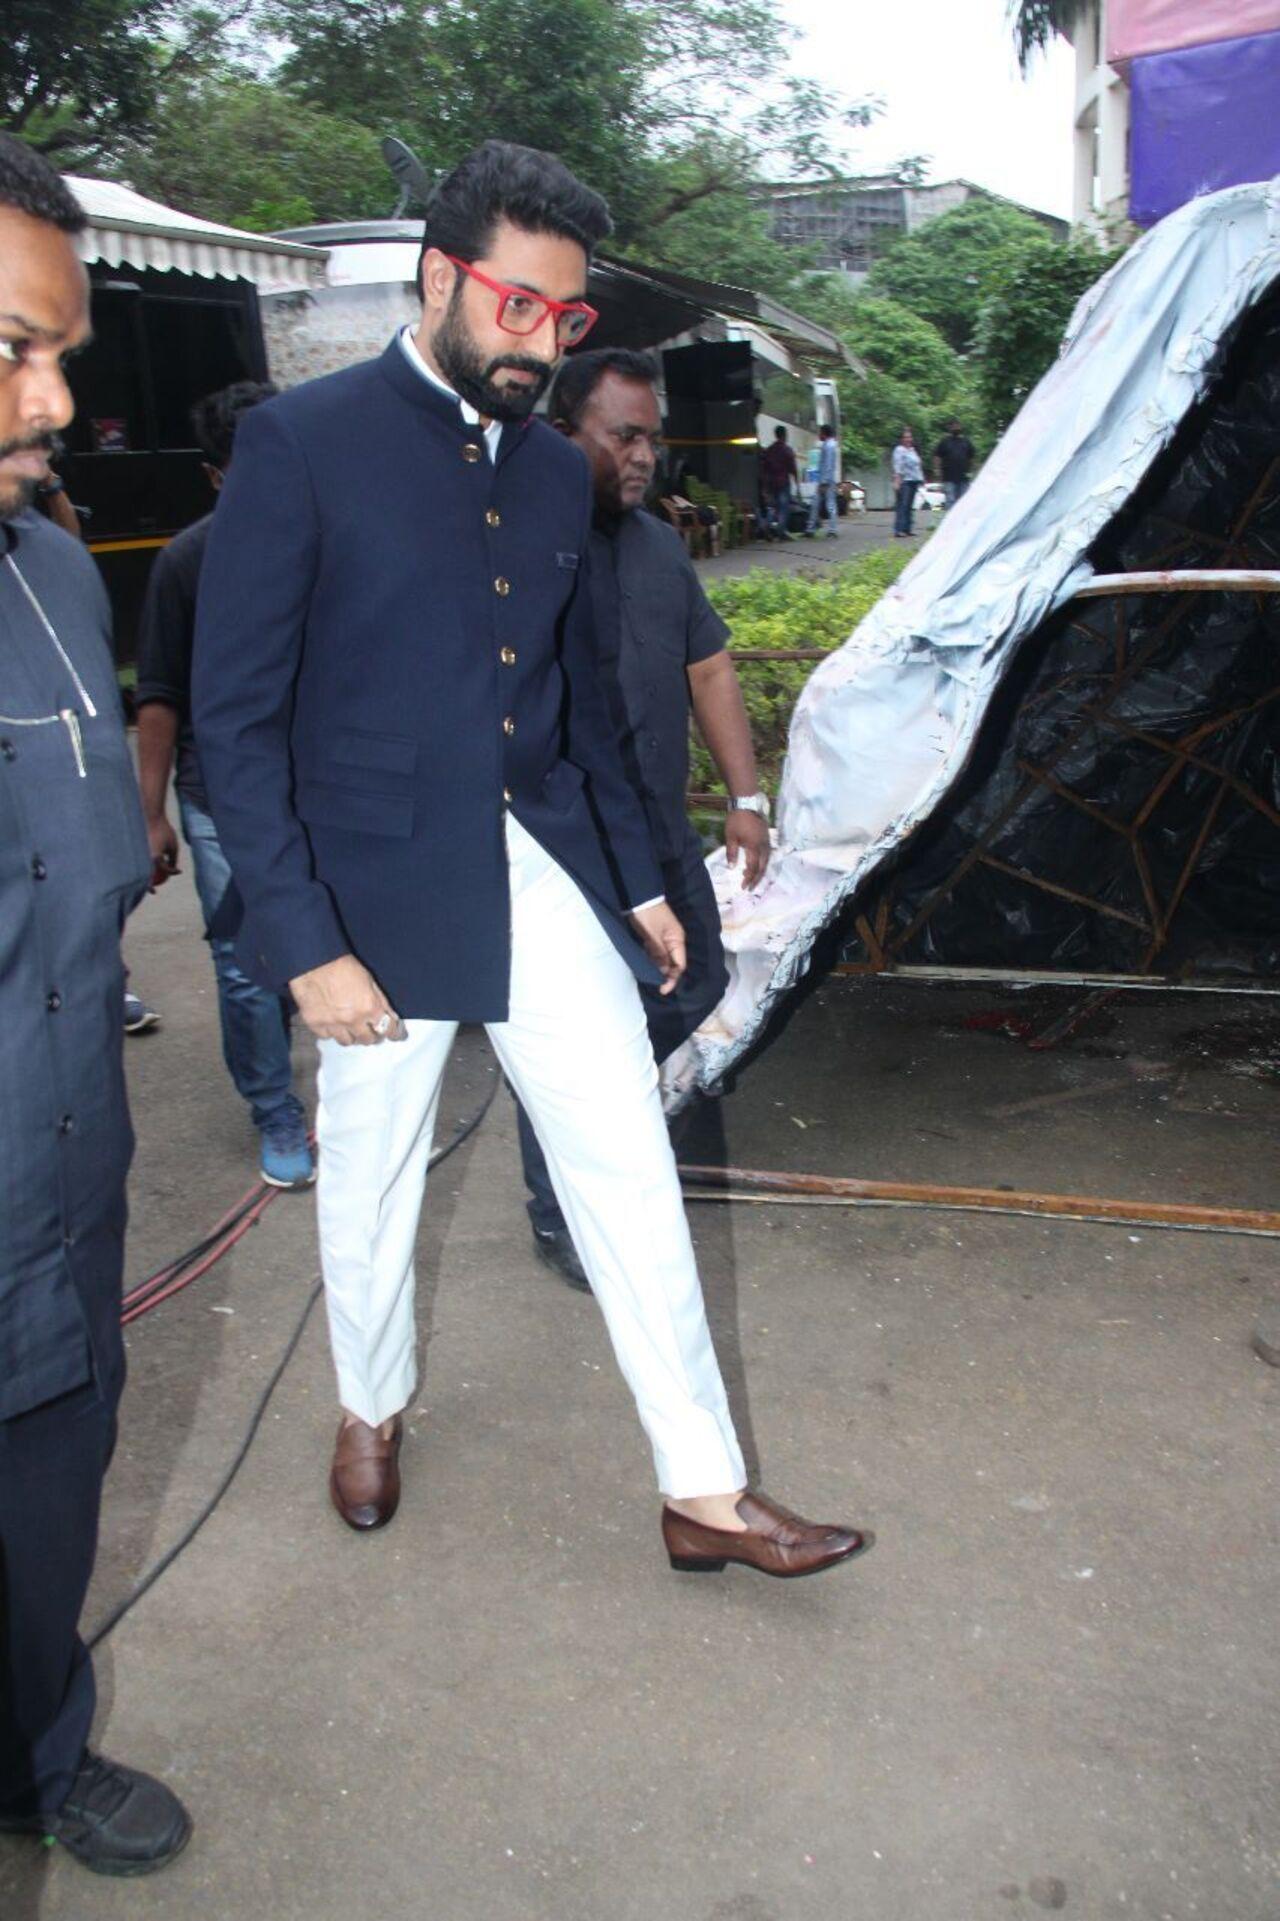 Abhishek Bachchan was later snapped wearing a blue suit paired with white pants as he attended 'India's Best Dancer 3' 'Ghoomer' Special episode 